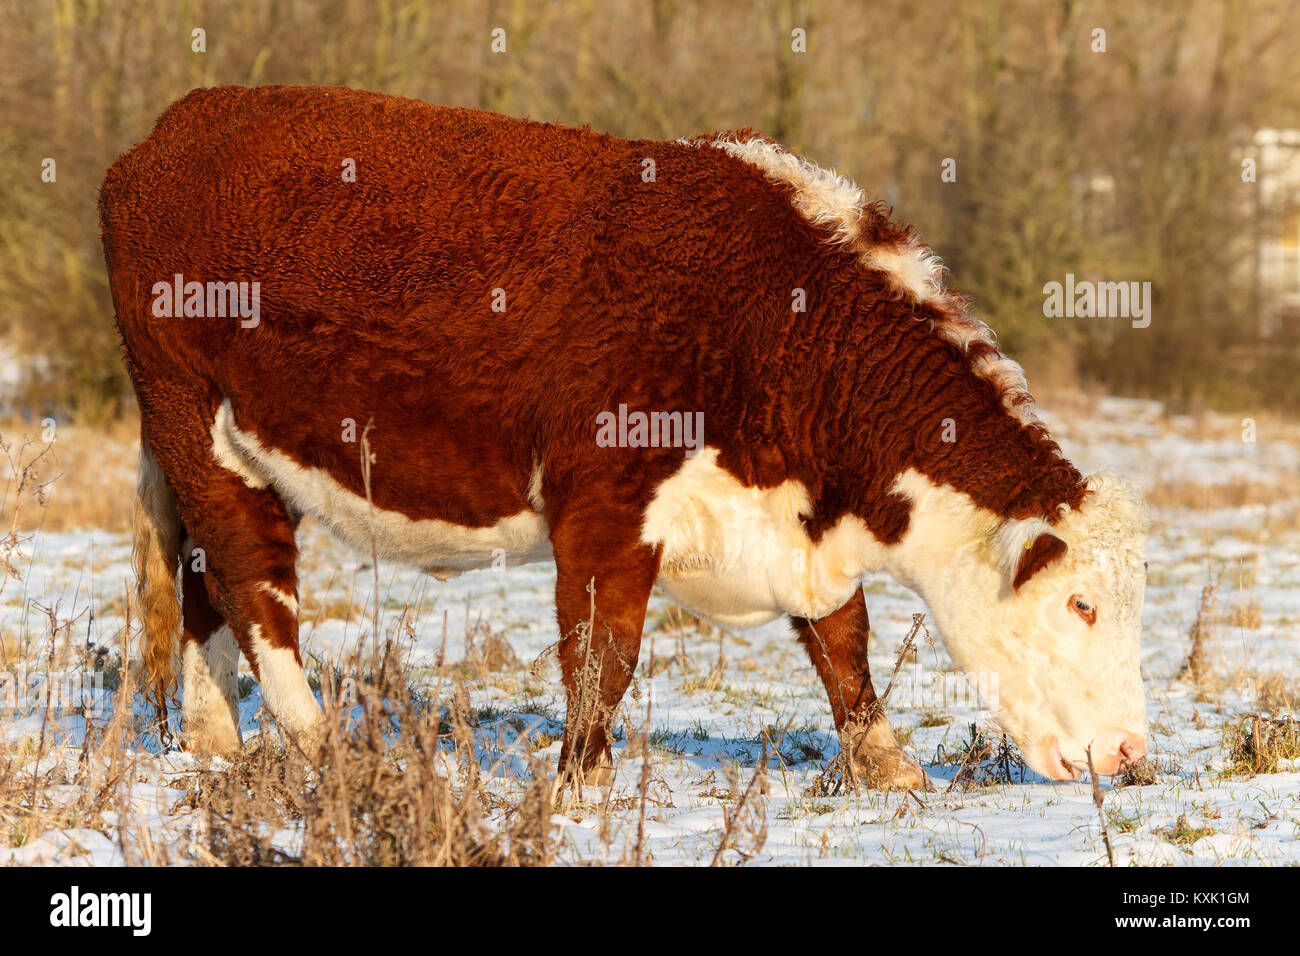 Big highland cattle of scotland searching for food on field of snow Stock Photo